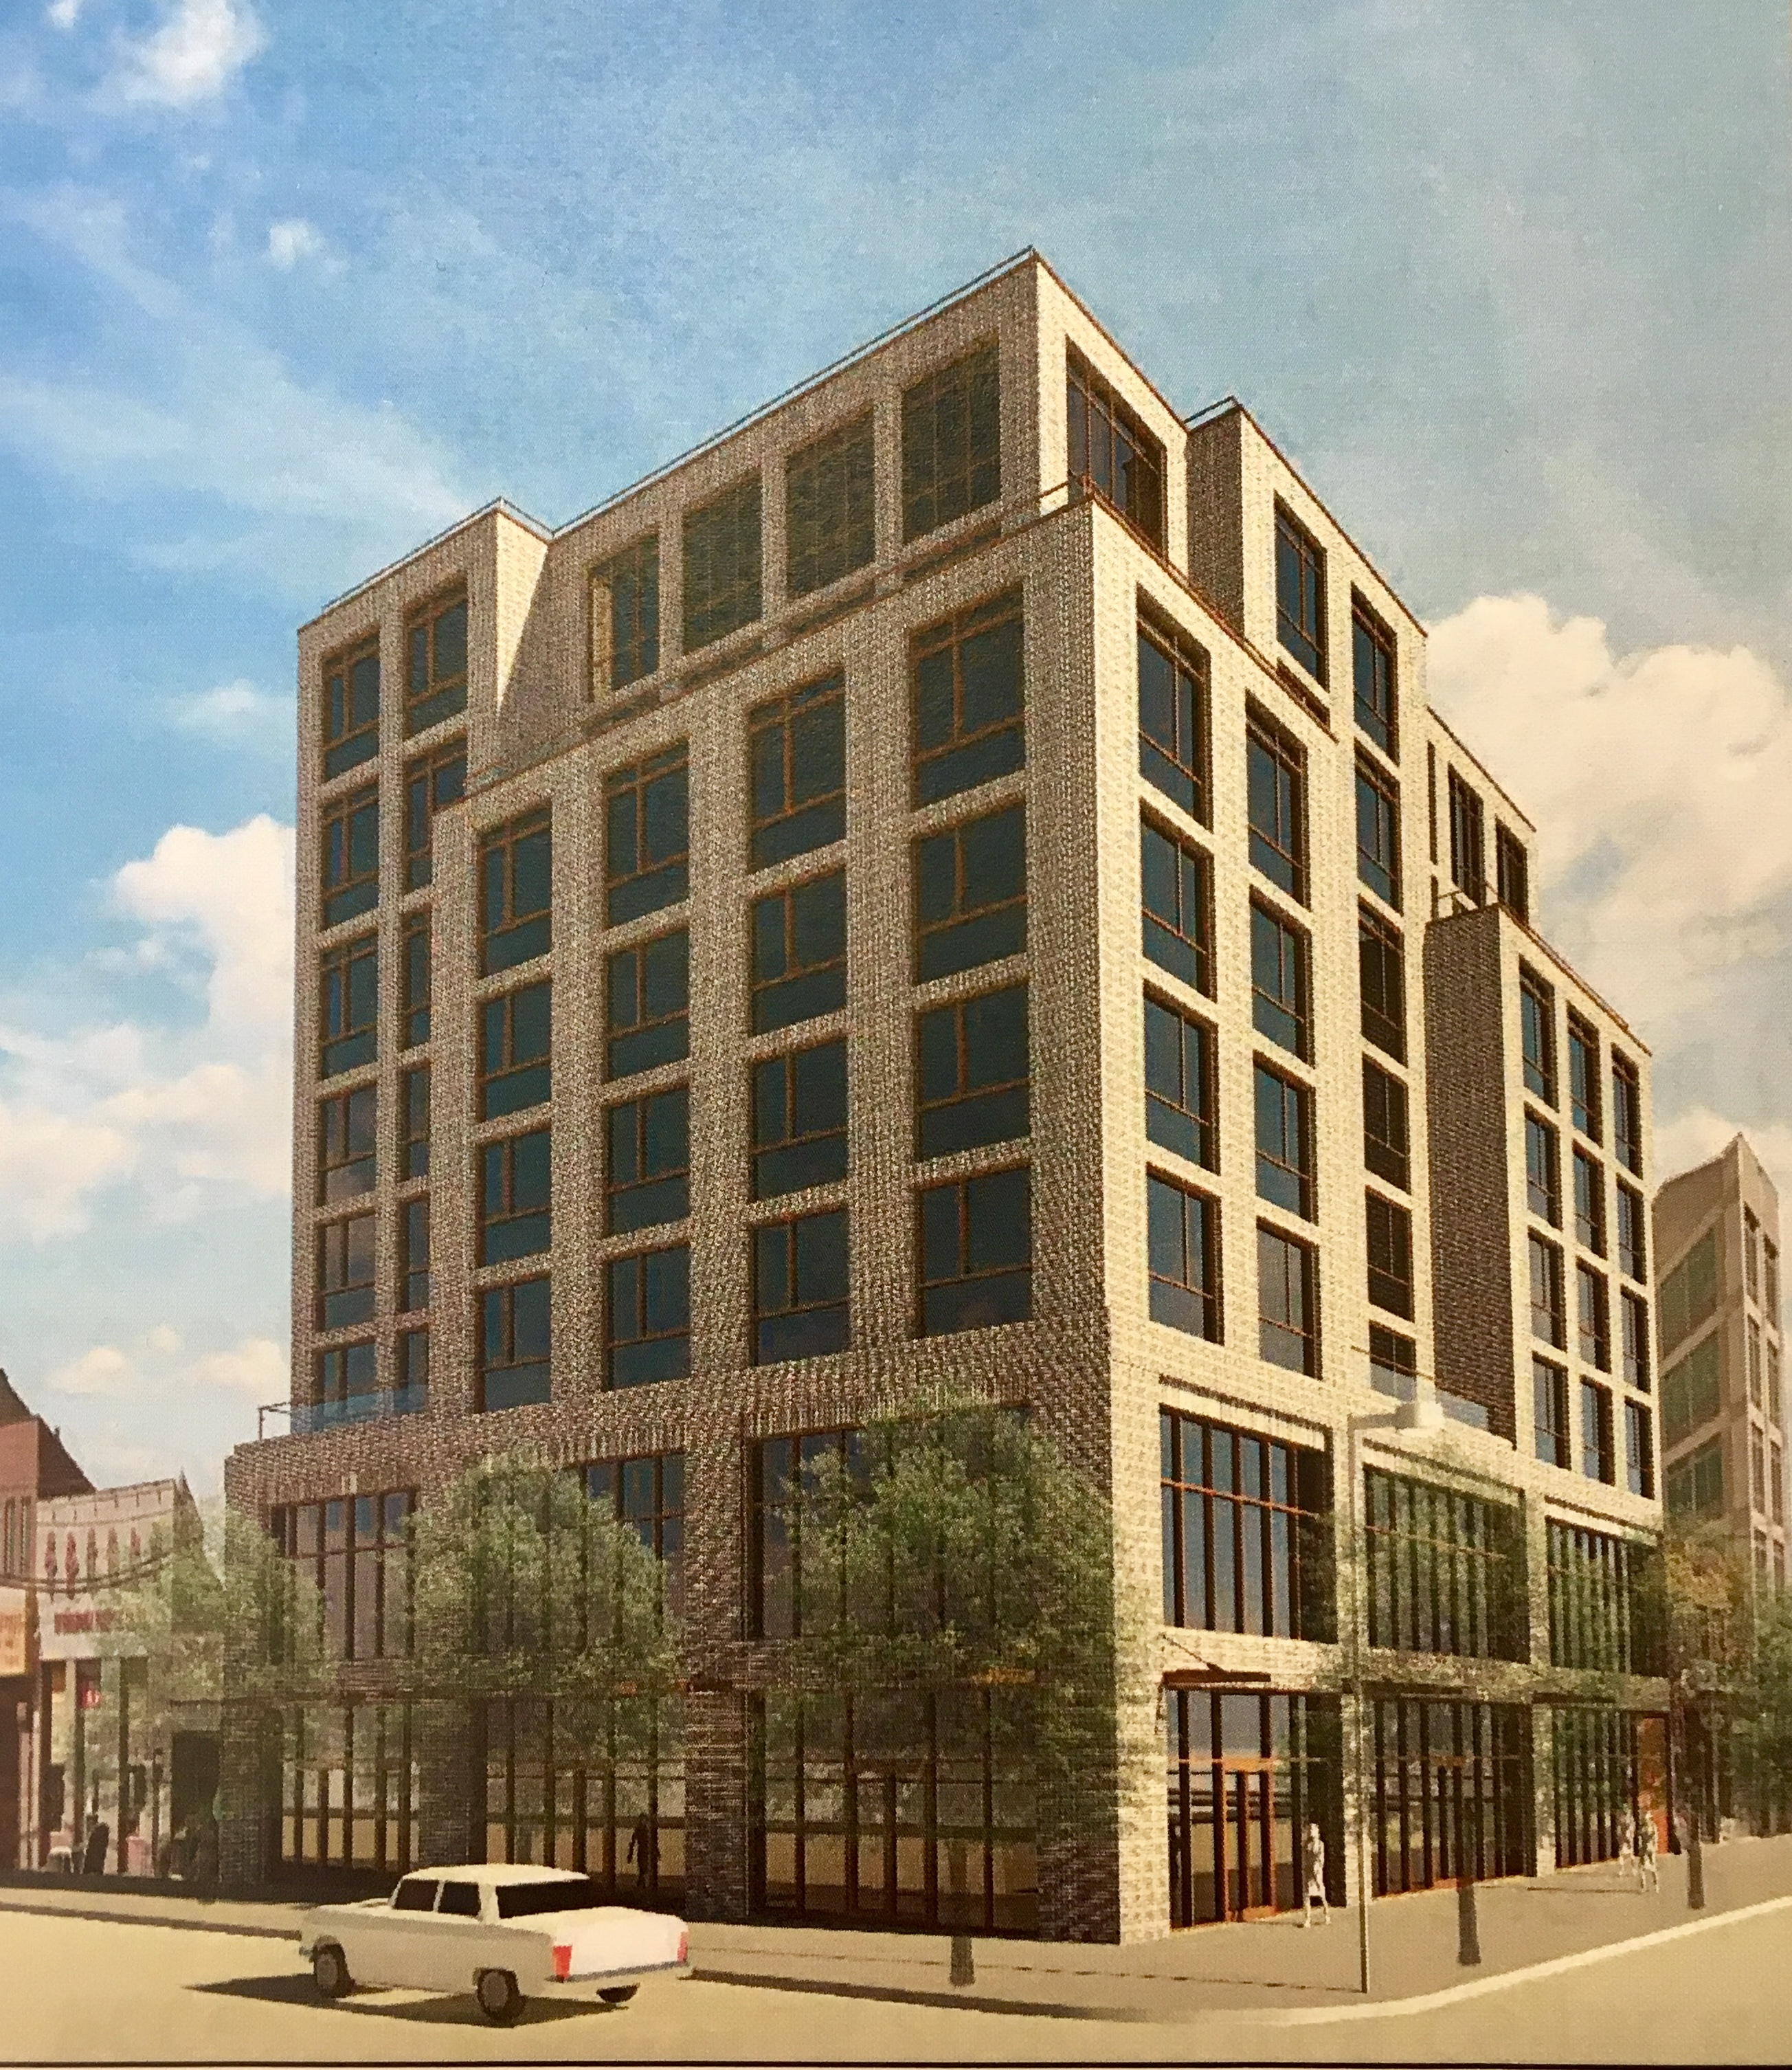 A rendering of the proposed development for 6418 Eighth Ave.